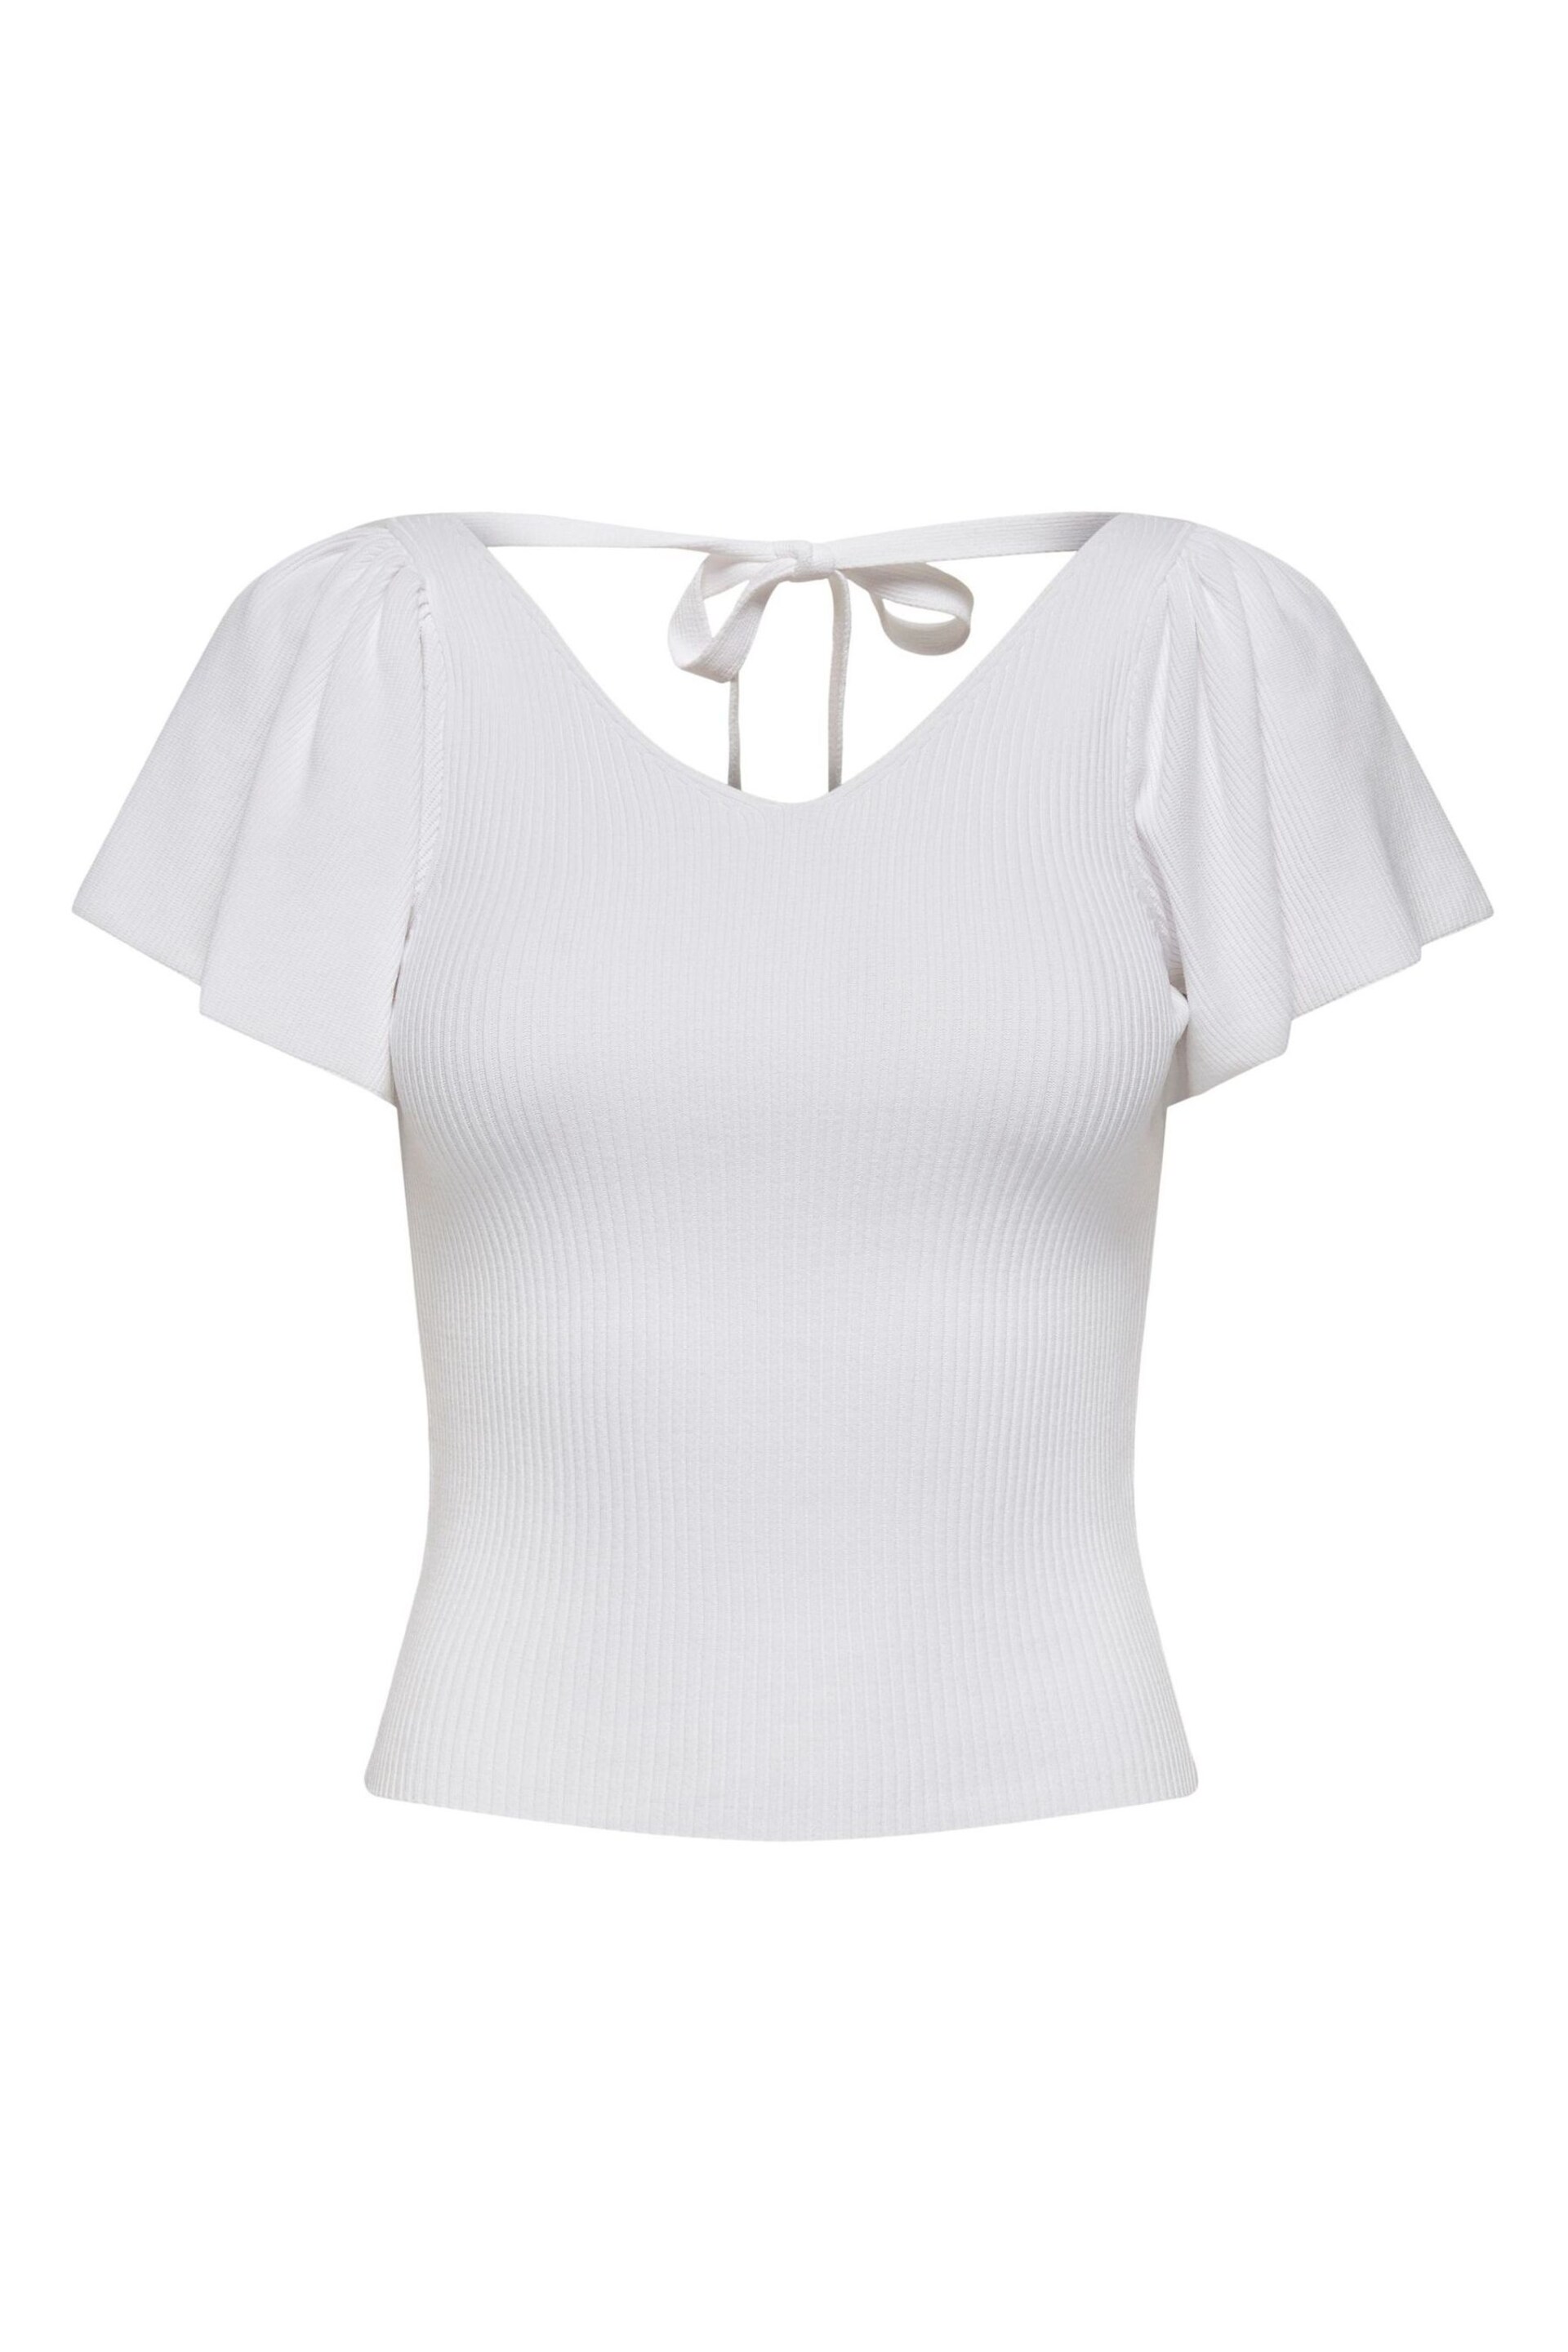 ONLY White Frill Sleeve Top - Image 5 of 5